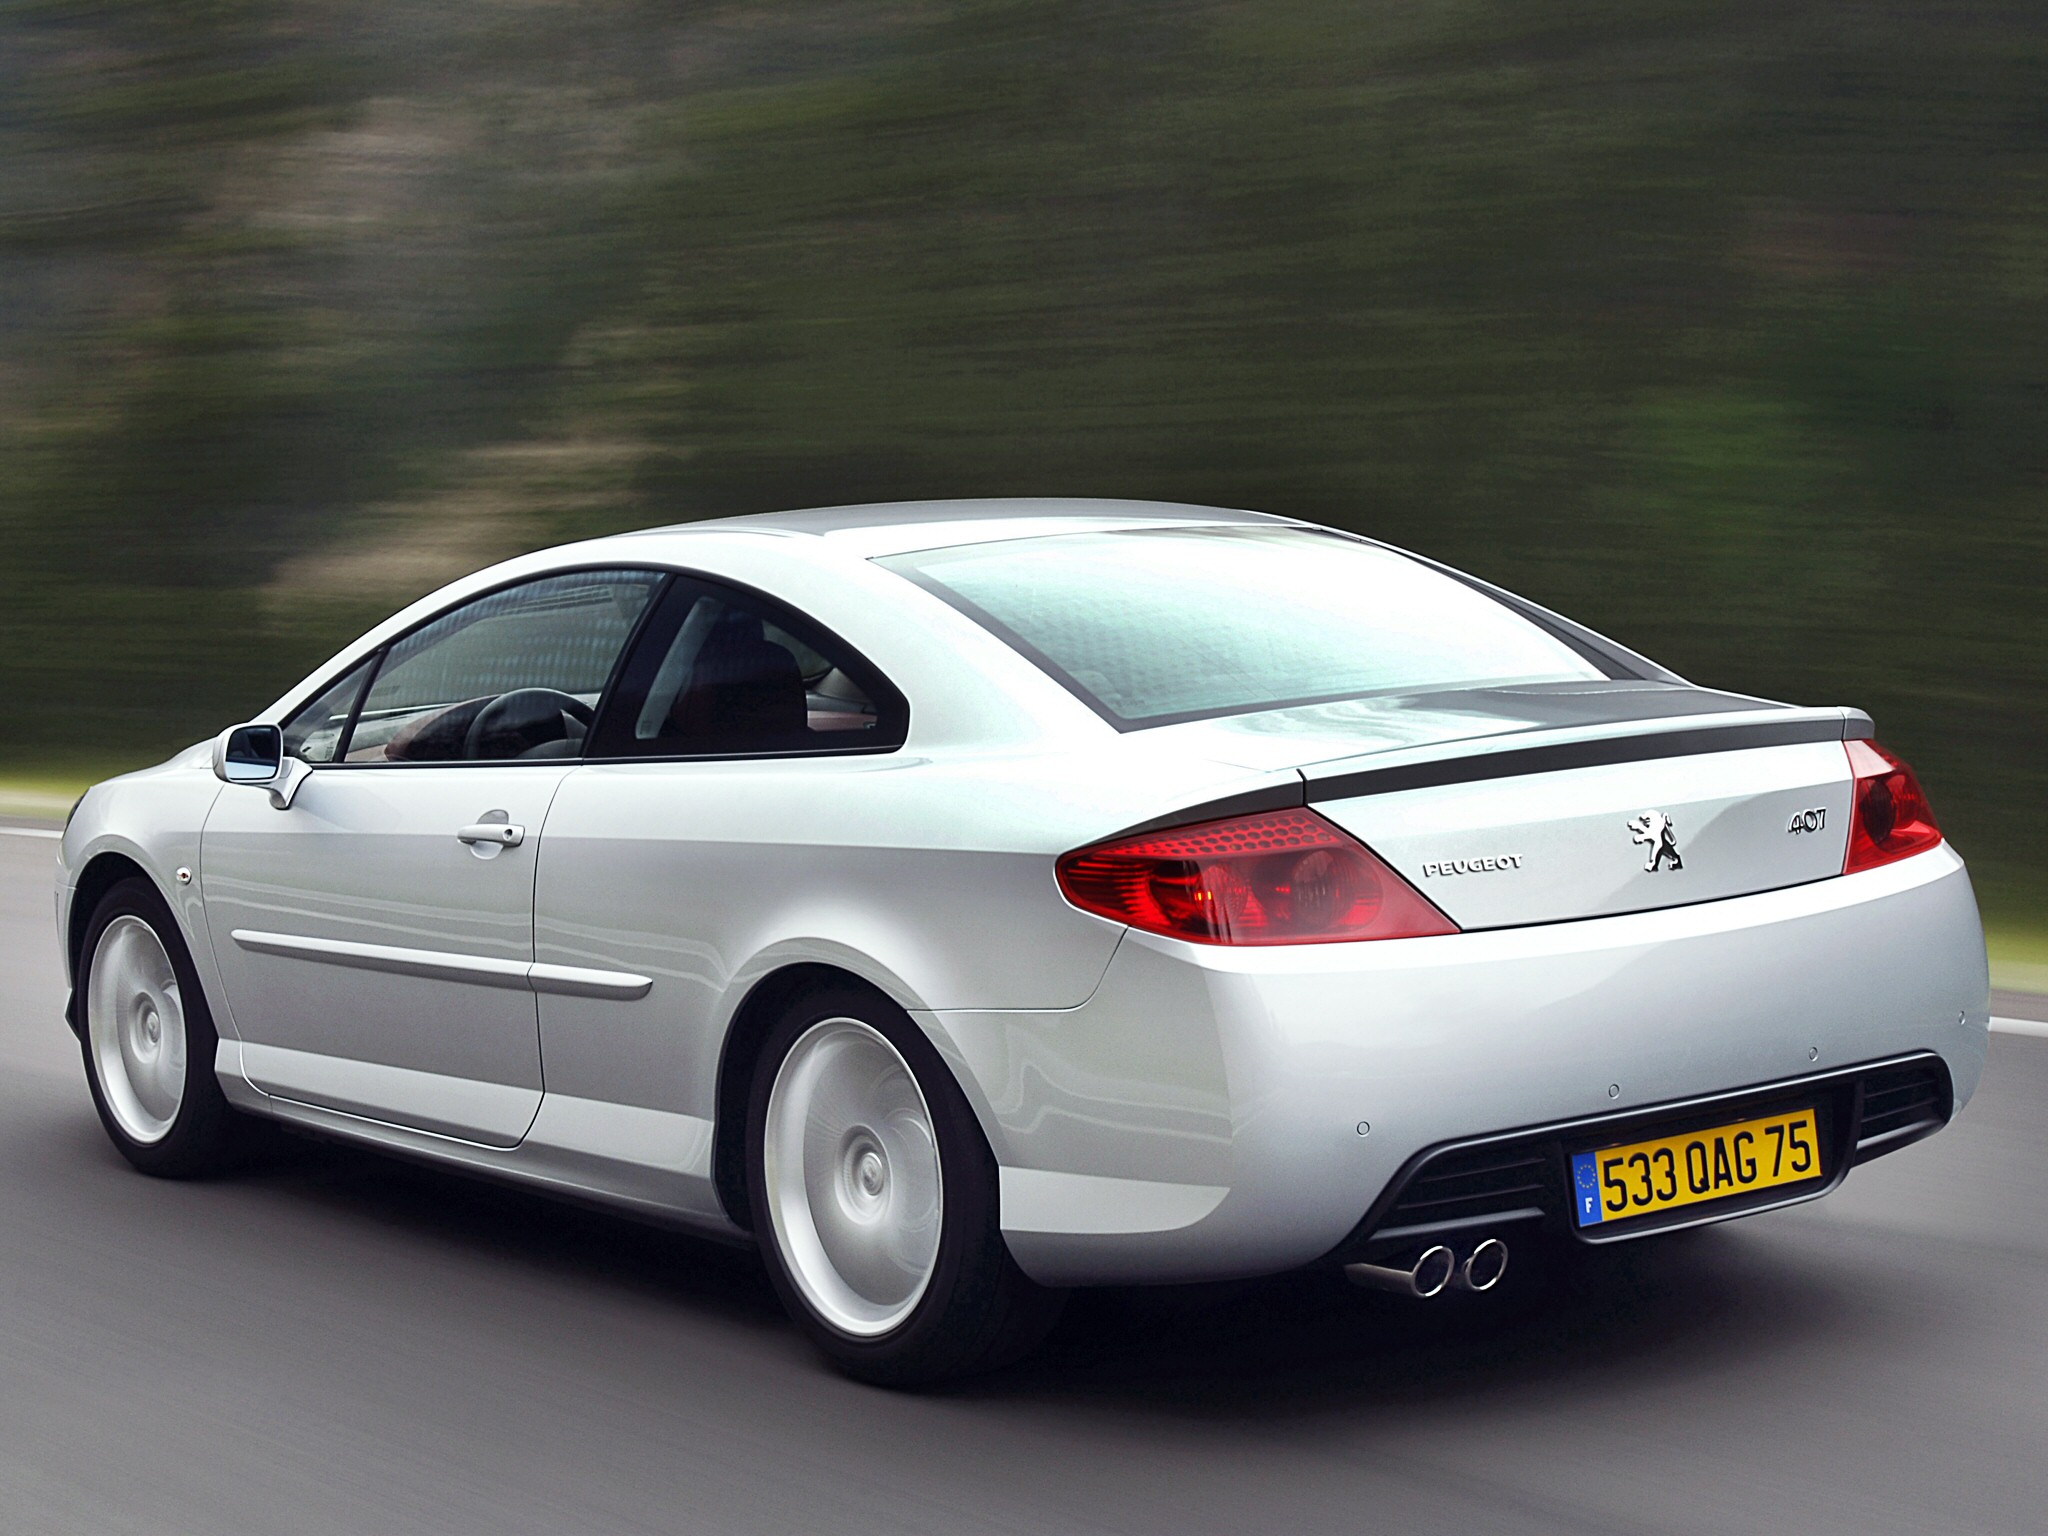 Peugeot 407 2005 Review, Amazing Pictures and Images